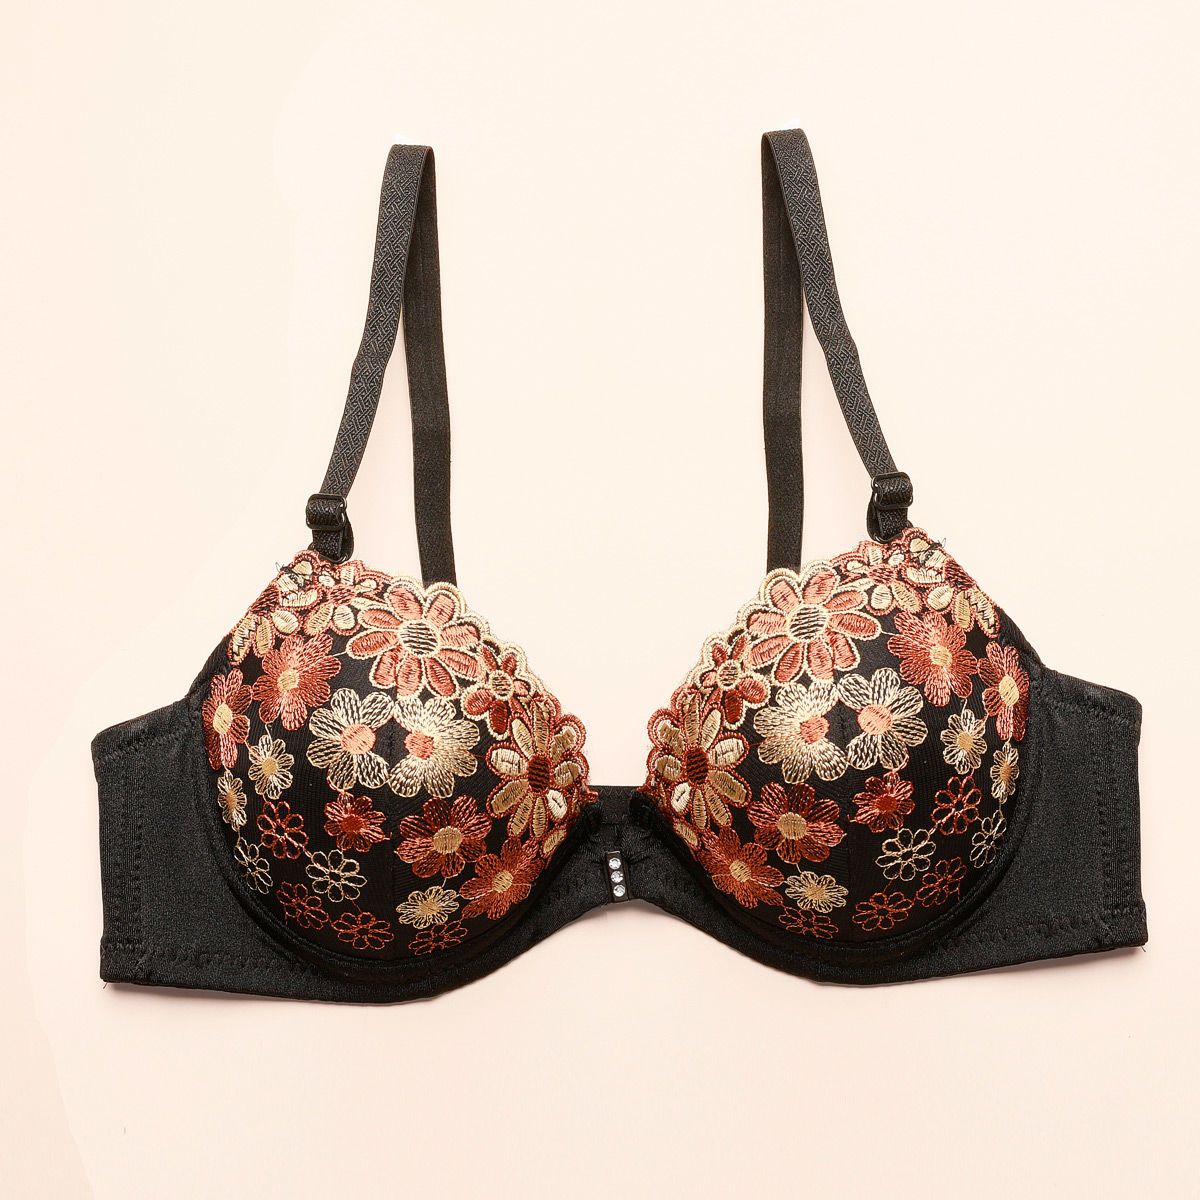 Aishuke small chest push-up bra thick cup sexy lace embroidery underwear women with steel ring bra close pair milk red